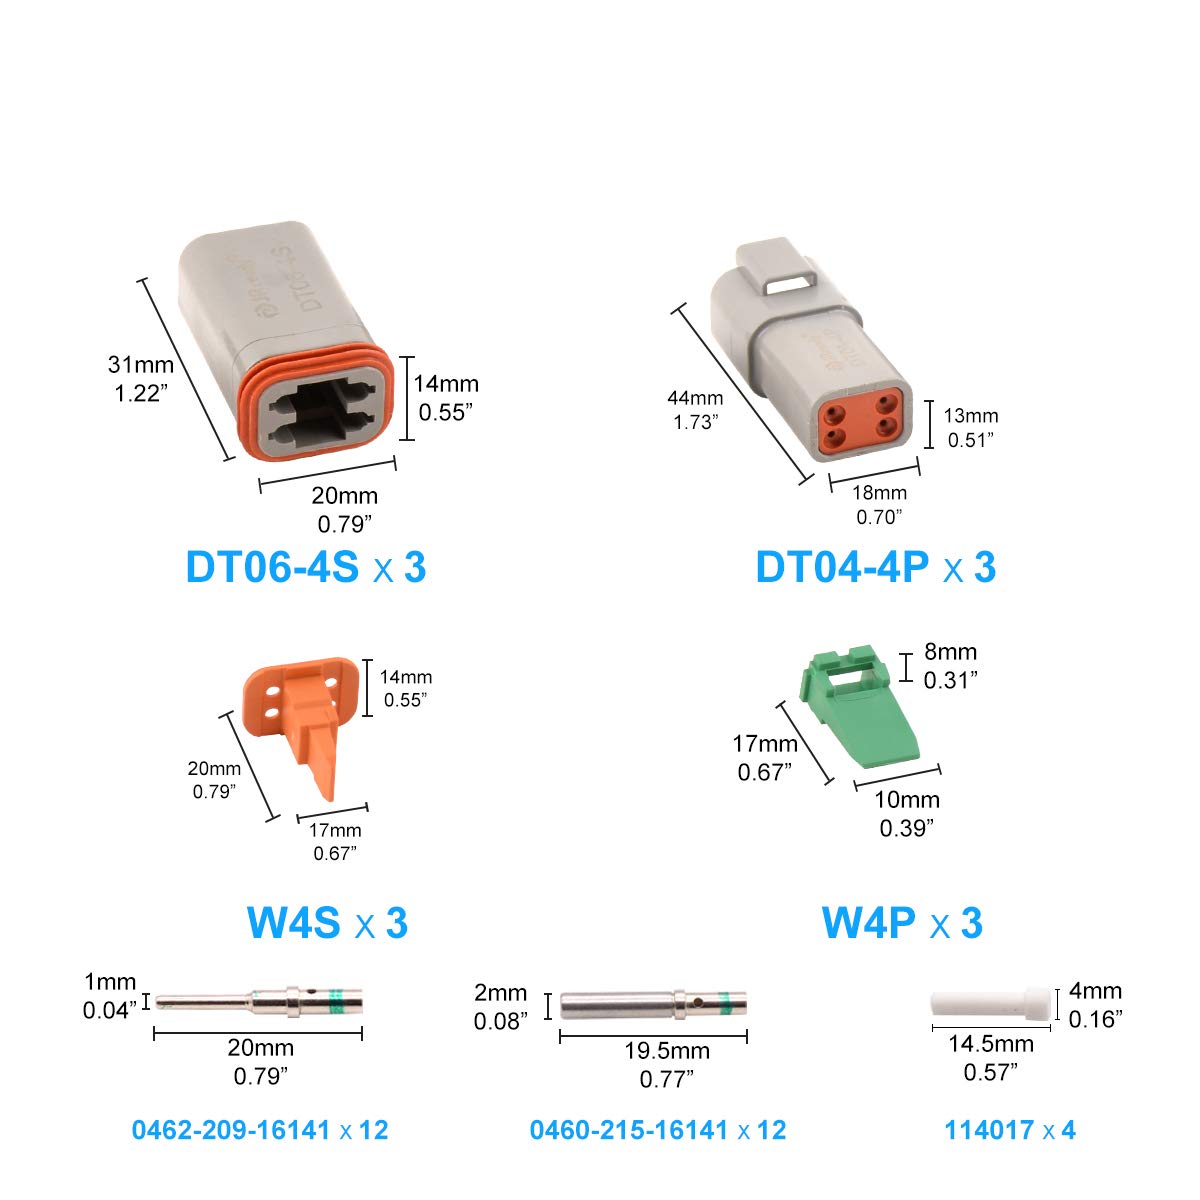 JRready ST6114 DT Connector 4 Pin Connector Gray Waterproof Electrical with Size 16 Solid Contacts and Seal Plug, 3 Pairs